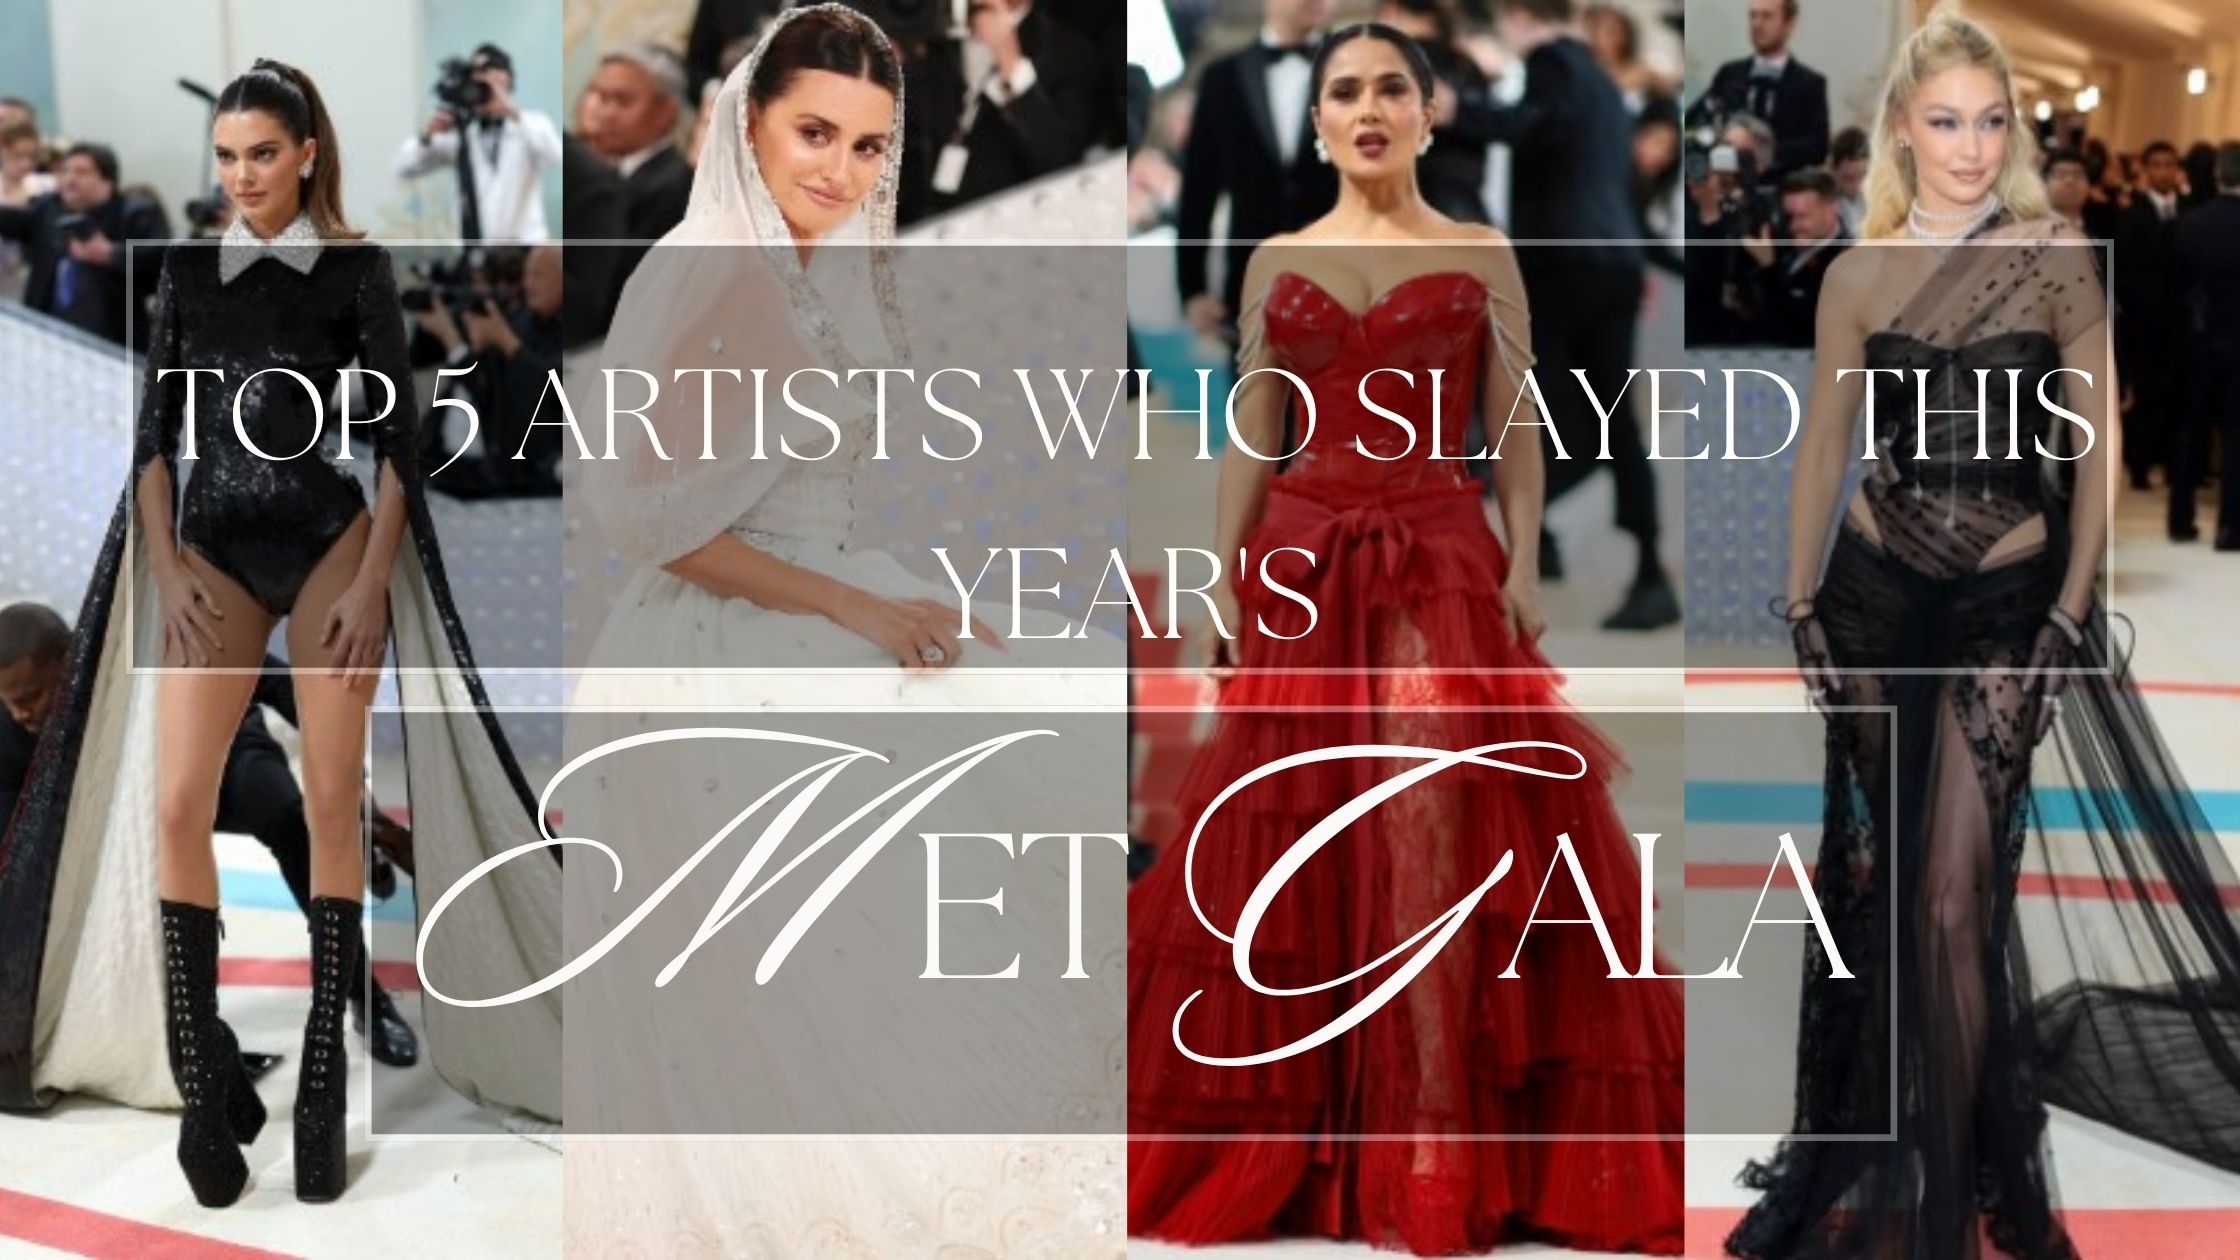 Top 5 artists who slayed this year’s Met Gala